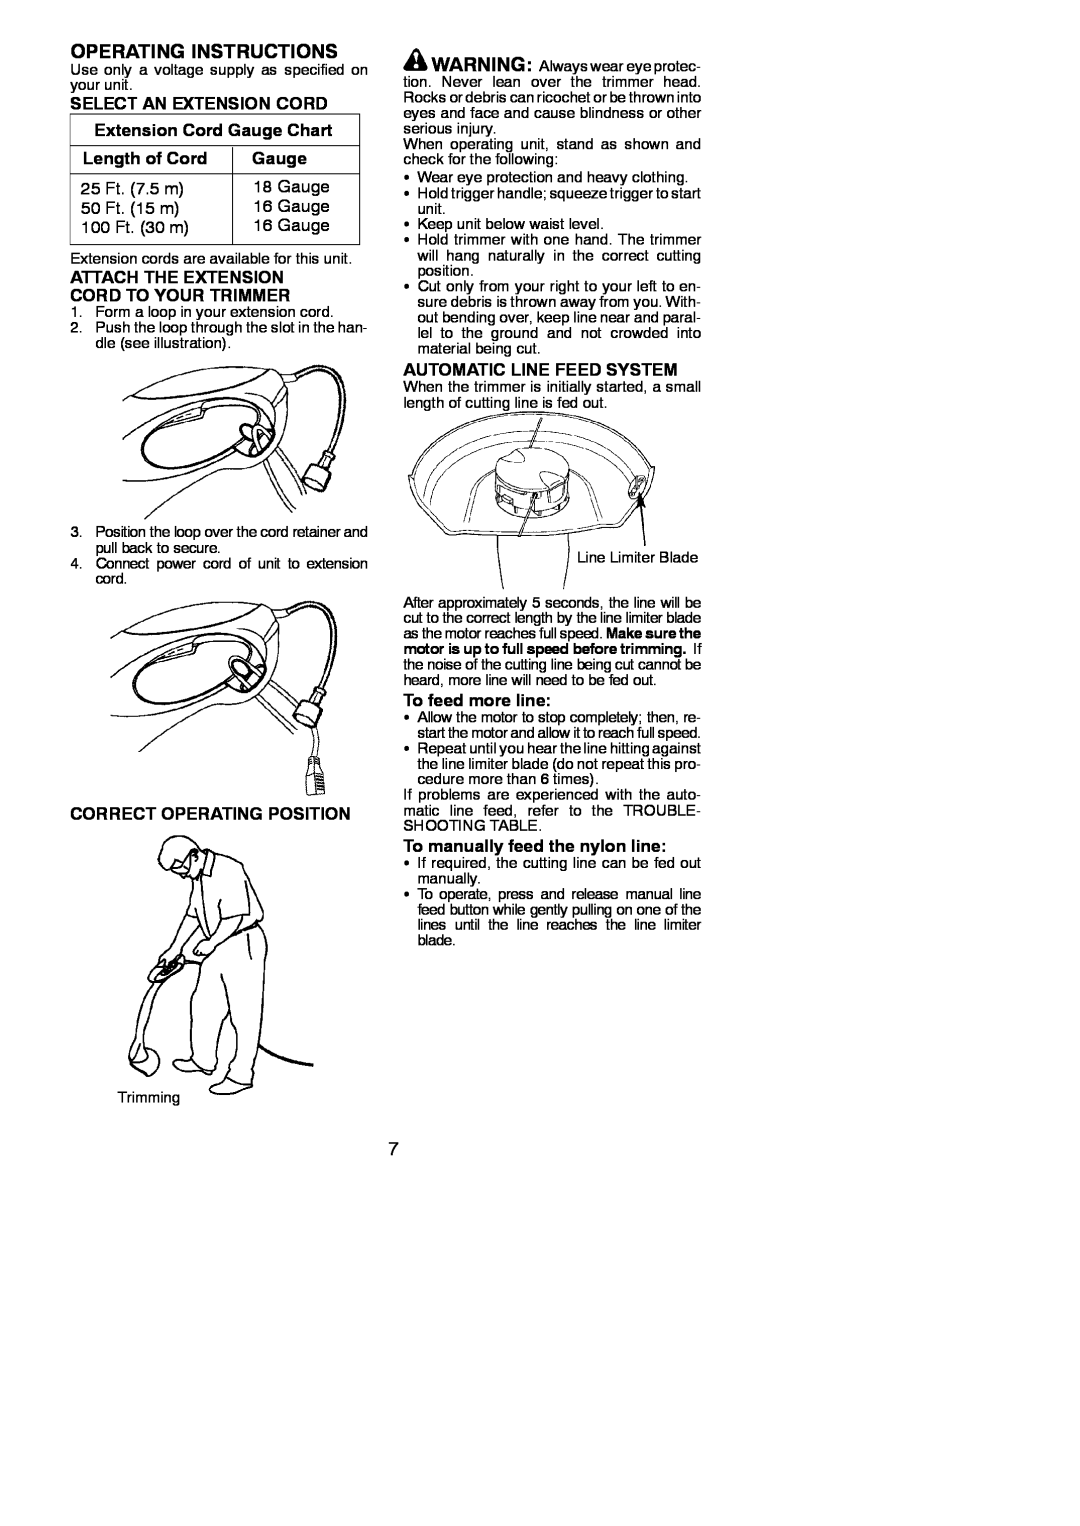 Weed Eater 545186764 Operating Instructions, Select An Extension Cord, Extension Cord Gauge Chart, Length of Cord 